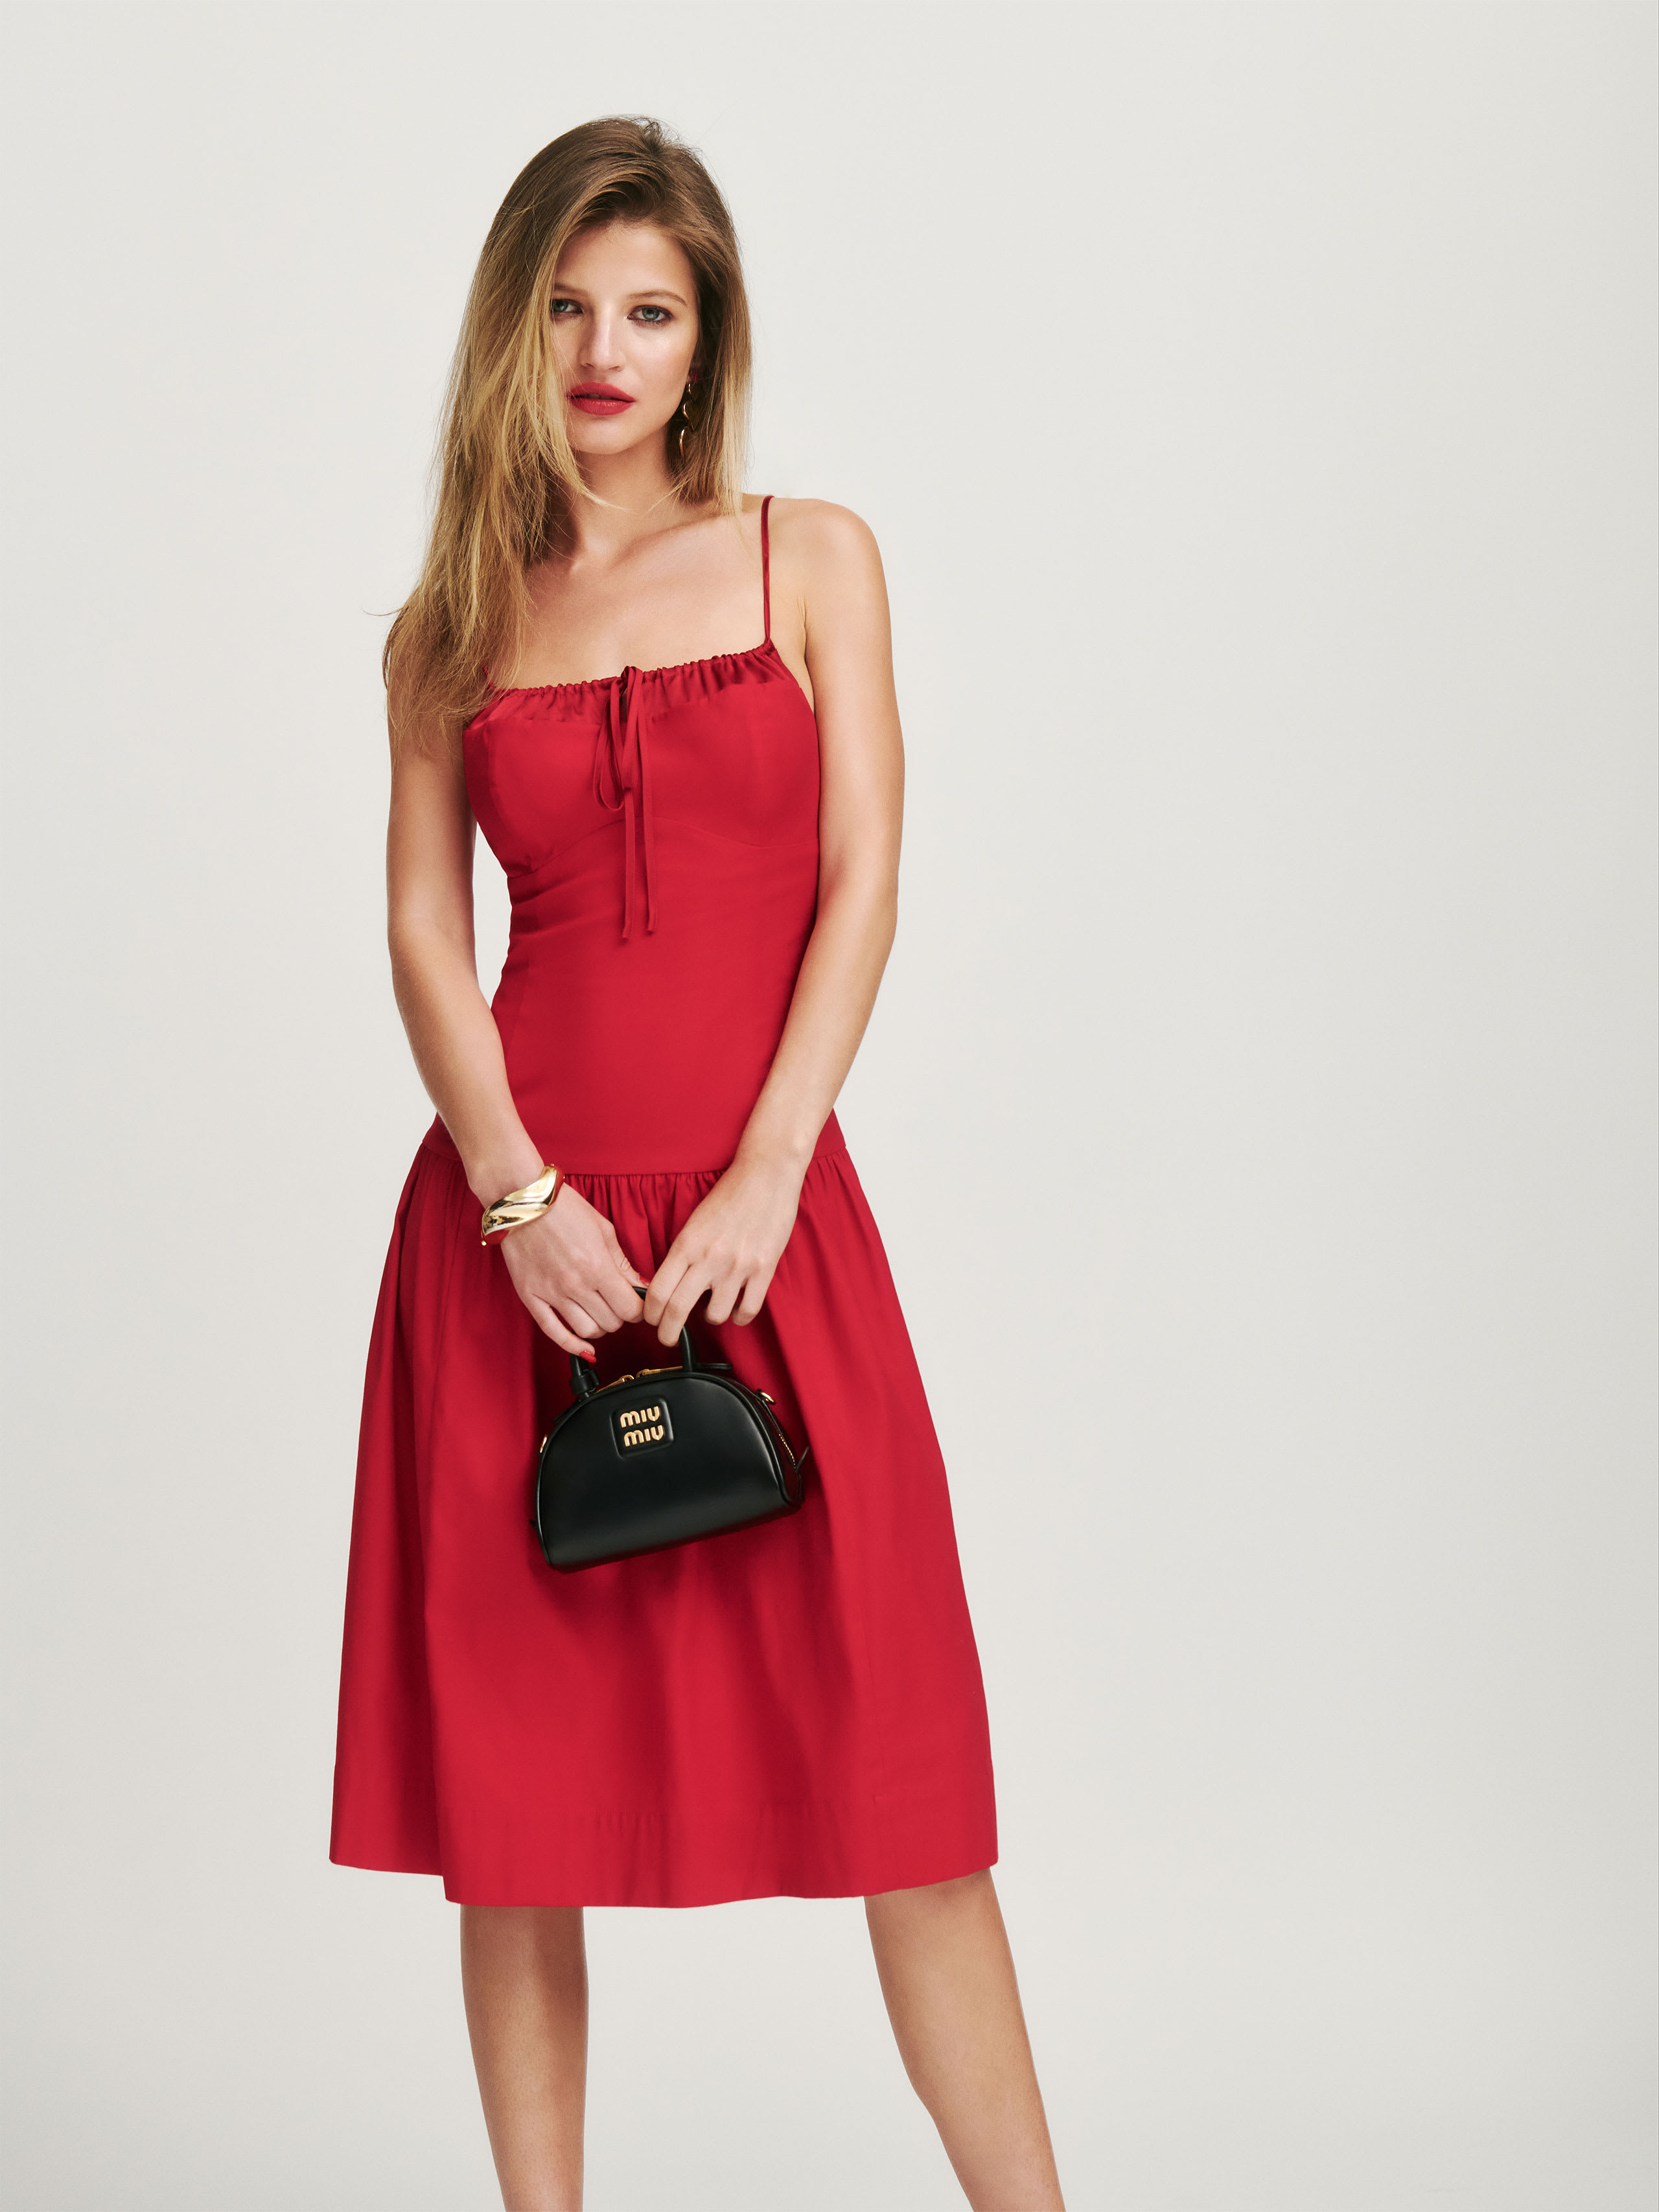 Reformation Analise Dress In Cherry